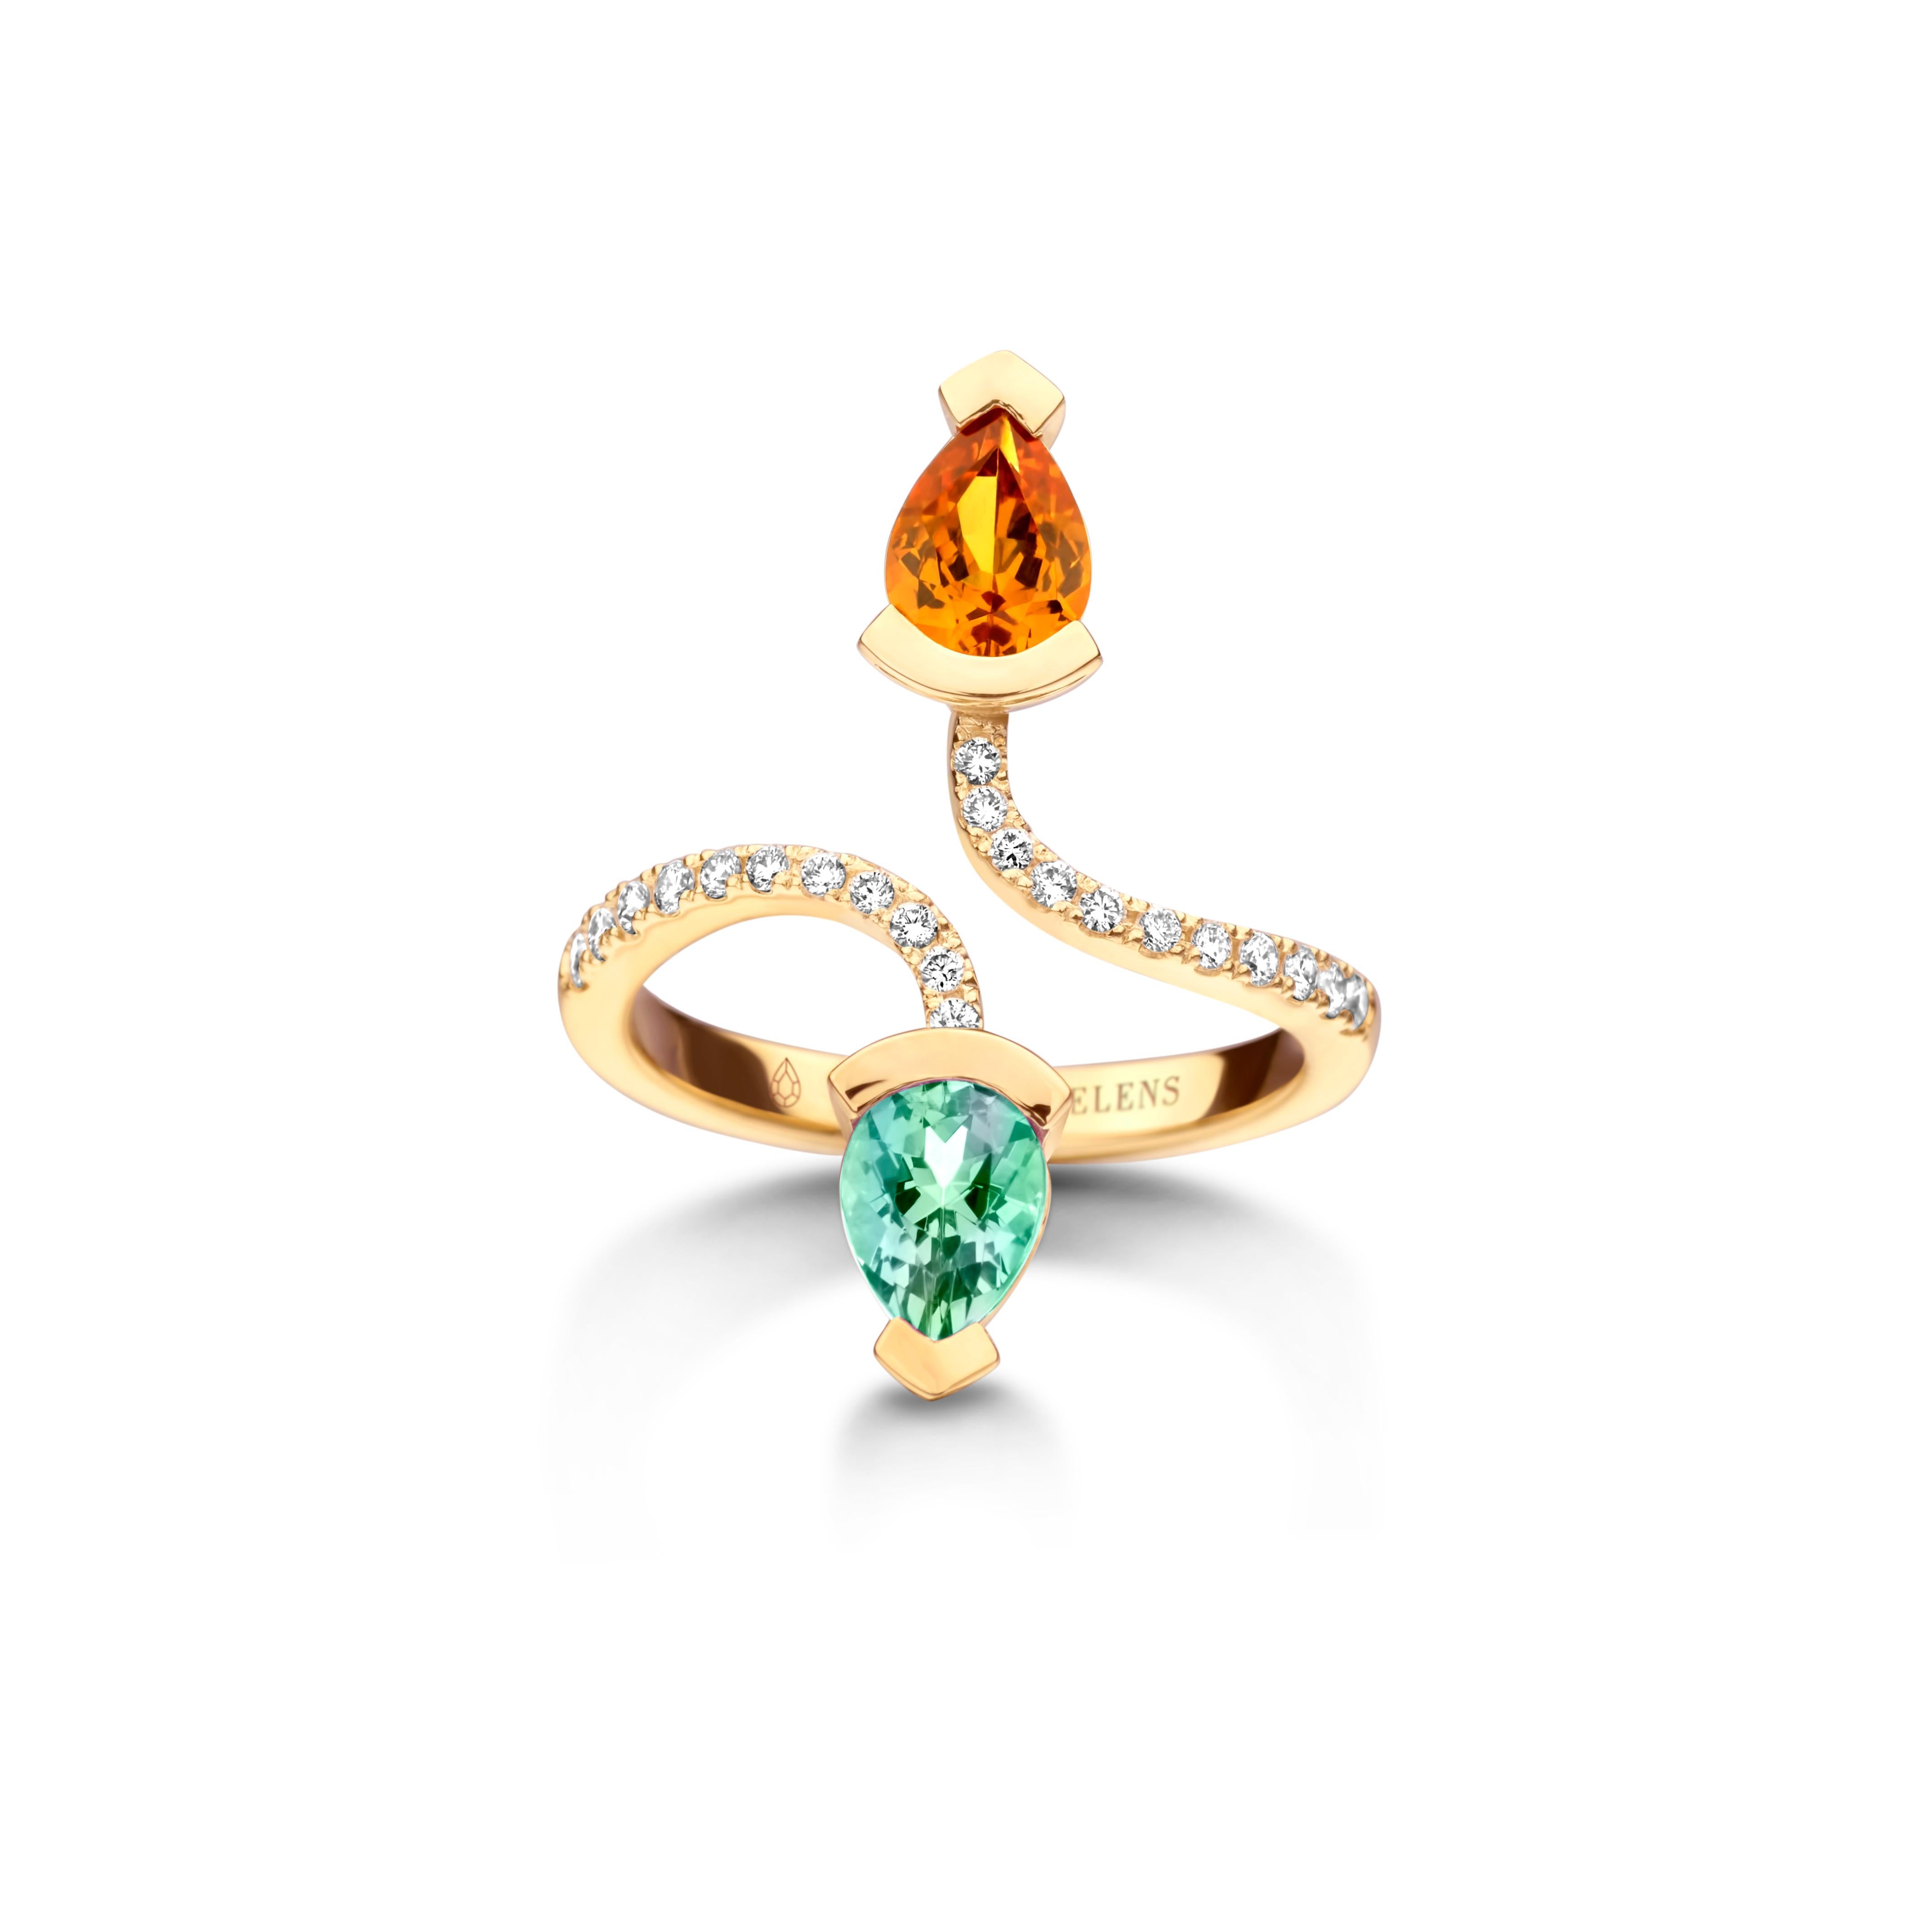 Adeline Duo ring in 18Kt rose gold 5g set with a pear-shaped mandarin garnet 0,70 Ct, a pear-shaped mint tourmaline 0,70 Ct and 0,19 Ct of white brilliant cut diamonds - VS F quality. Celine Roelens, a goldsmith and gemologist, is specialized in